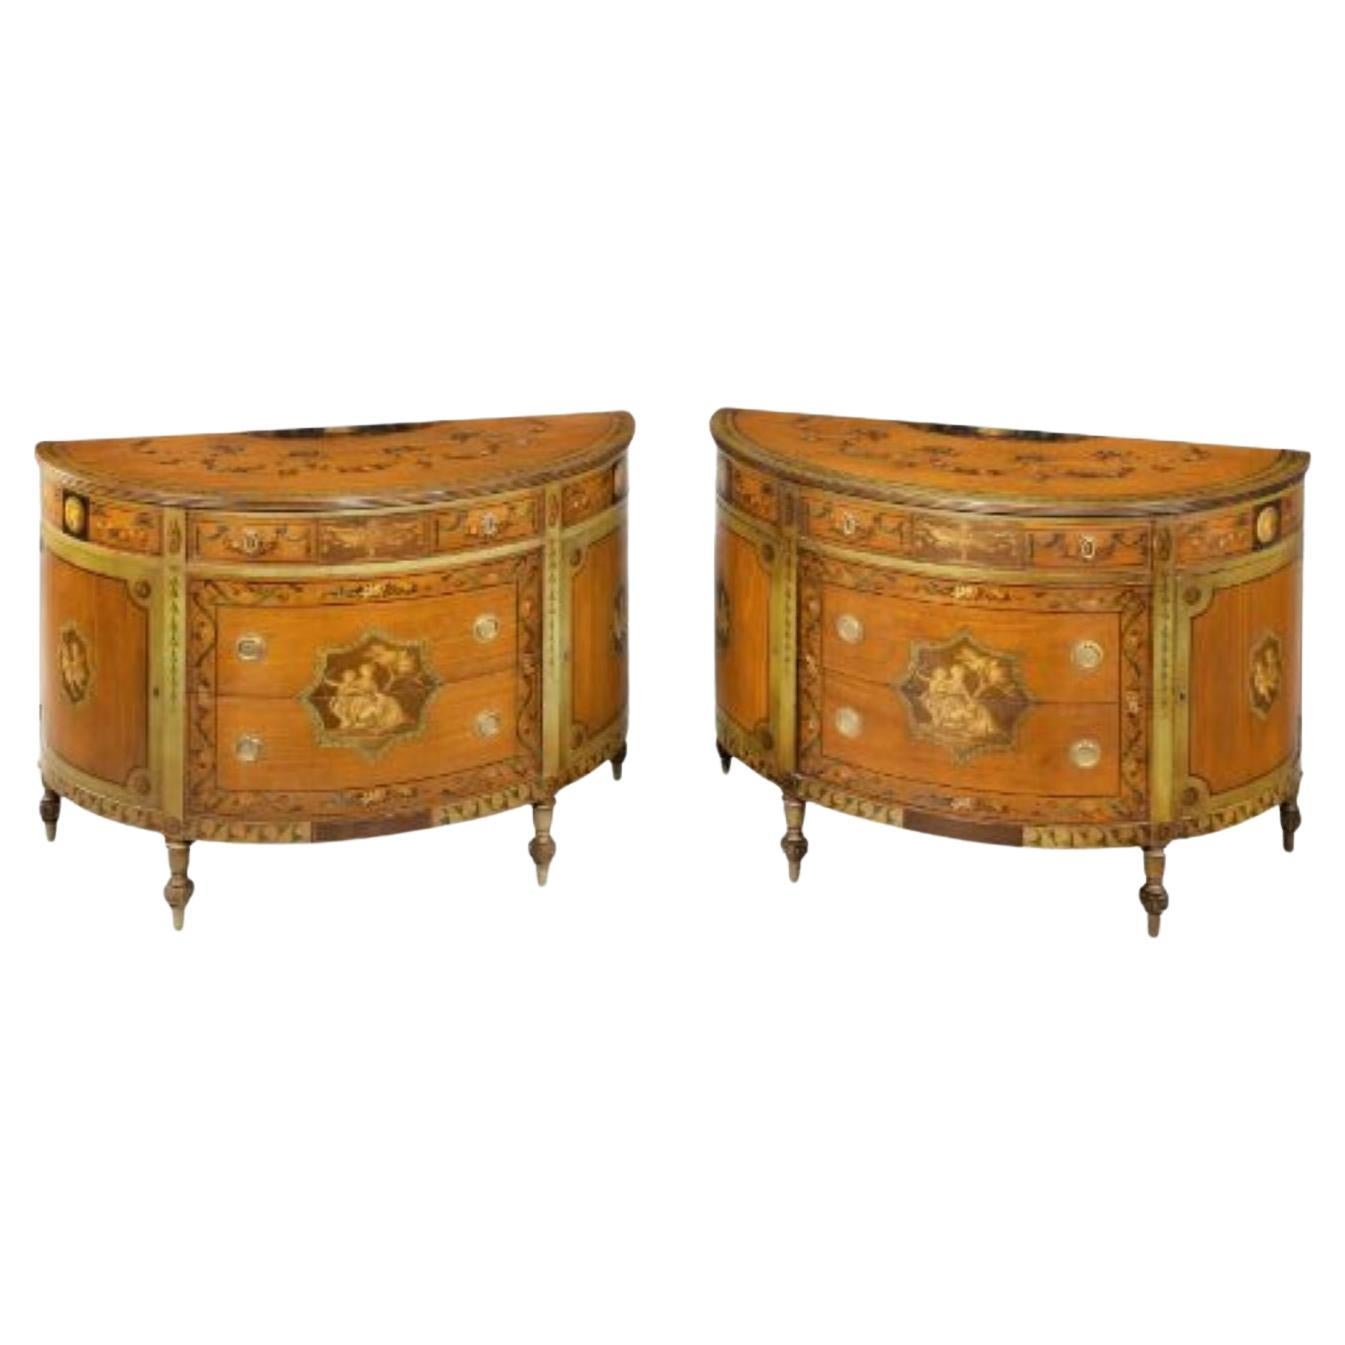 Y A Pair of Polychrome Decorated Satinwood Demi-Lune Commodes, 20th Century For Sale